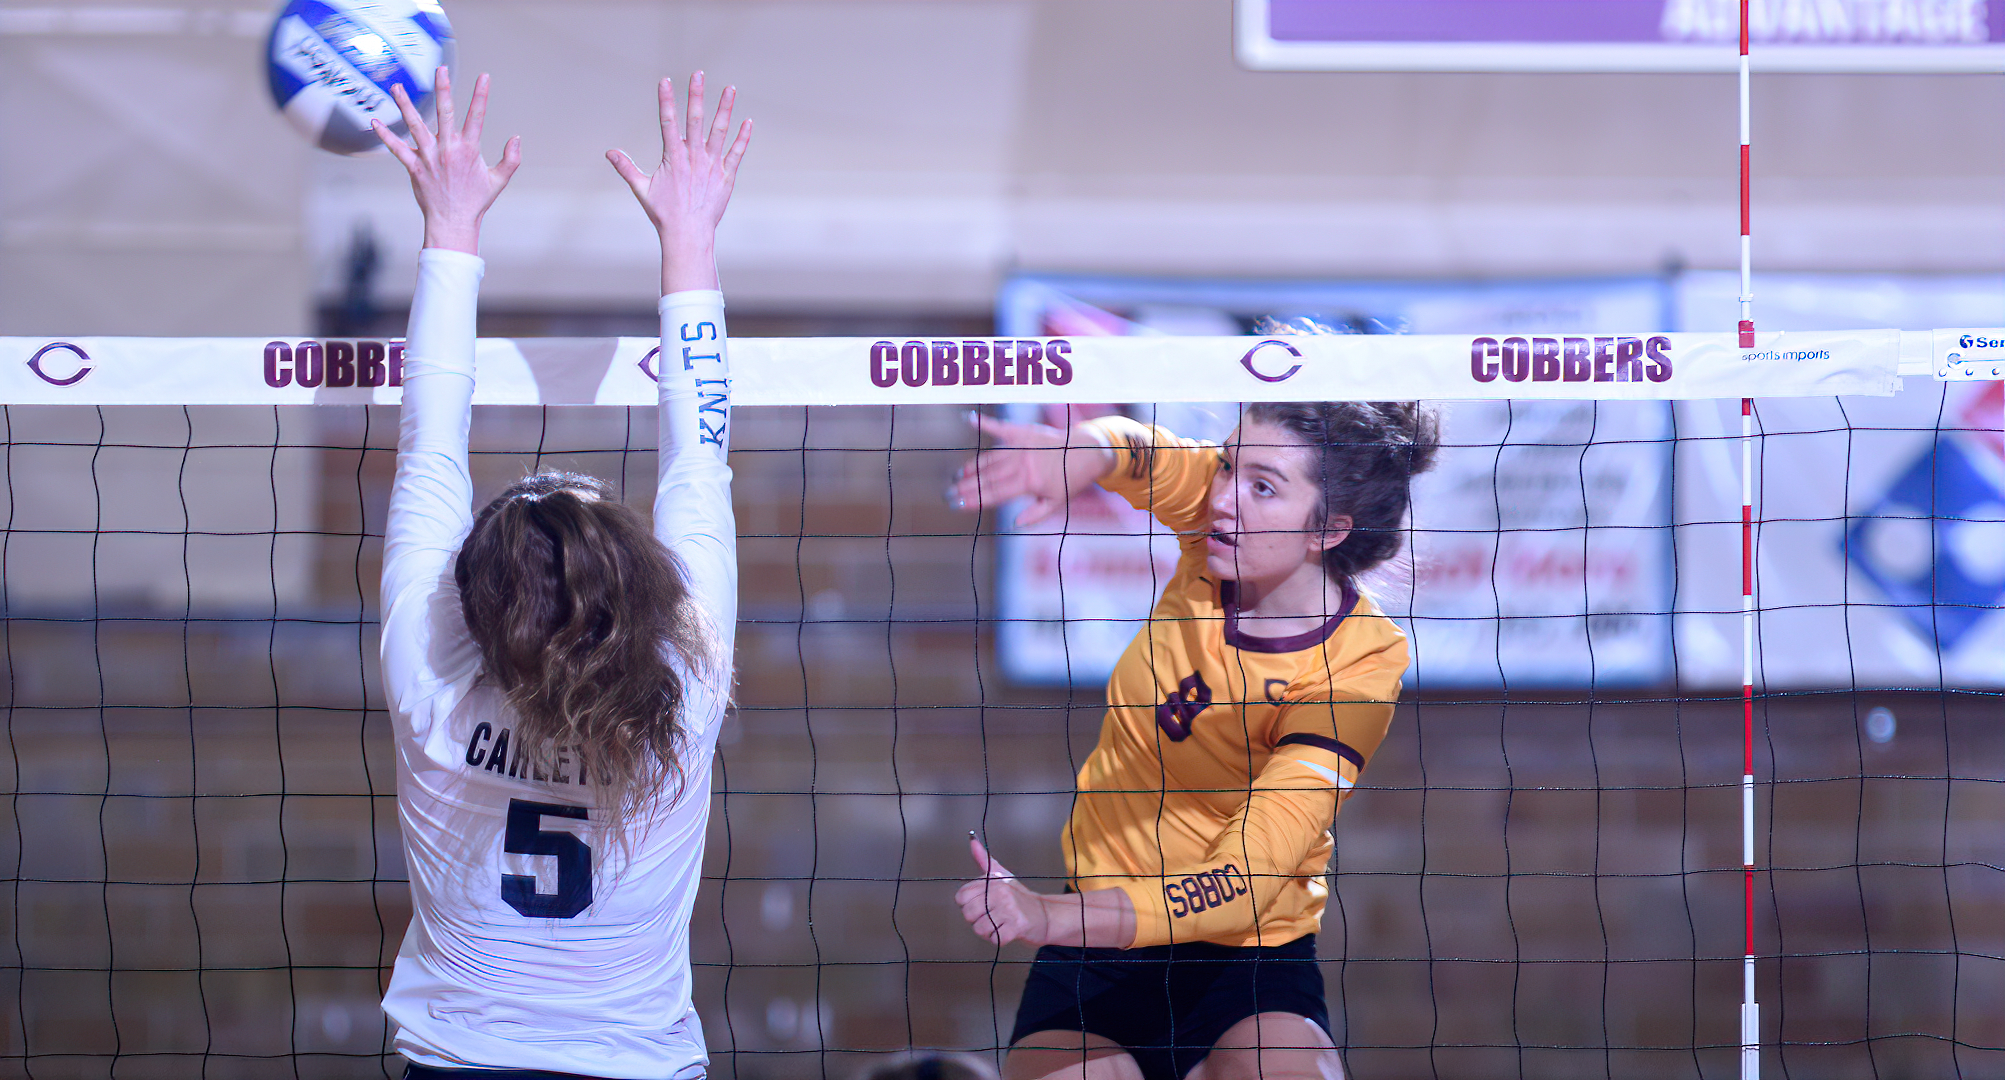 Junior Brook Carney goes cross court for the winner in the Cobbers' match with Carleton. She finished with 9 kills and a career-high 5 blocks.